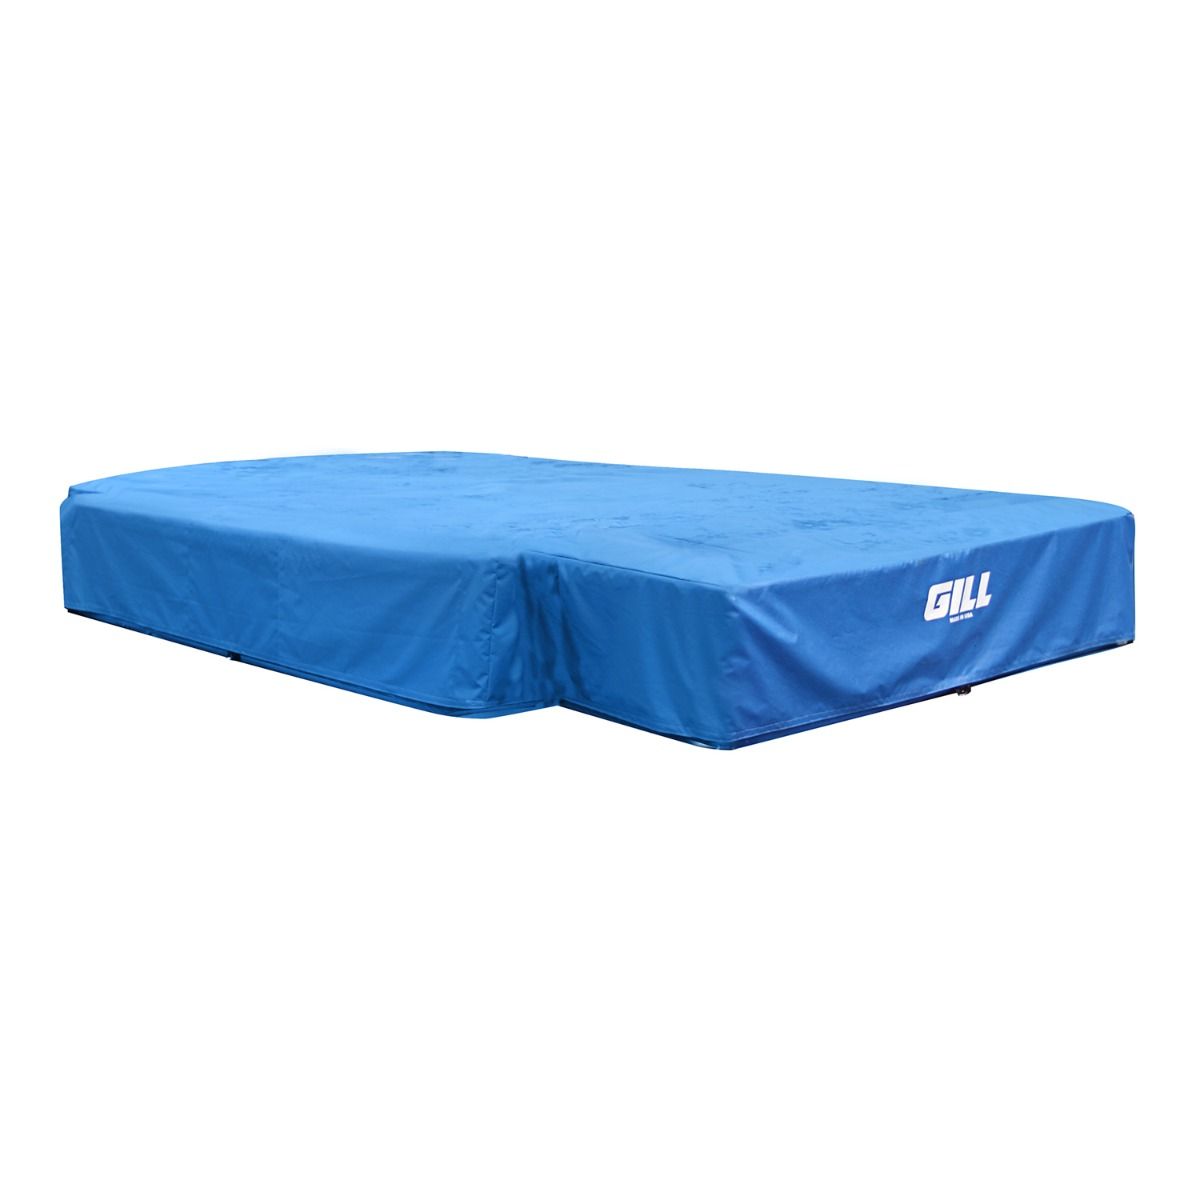 Gill G1 High Jump Weather Cover